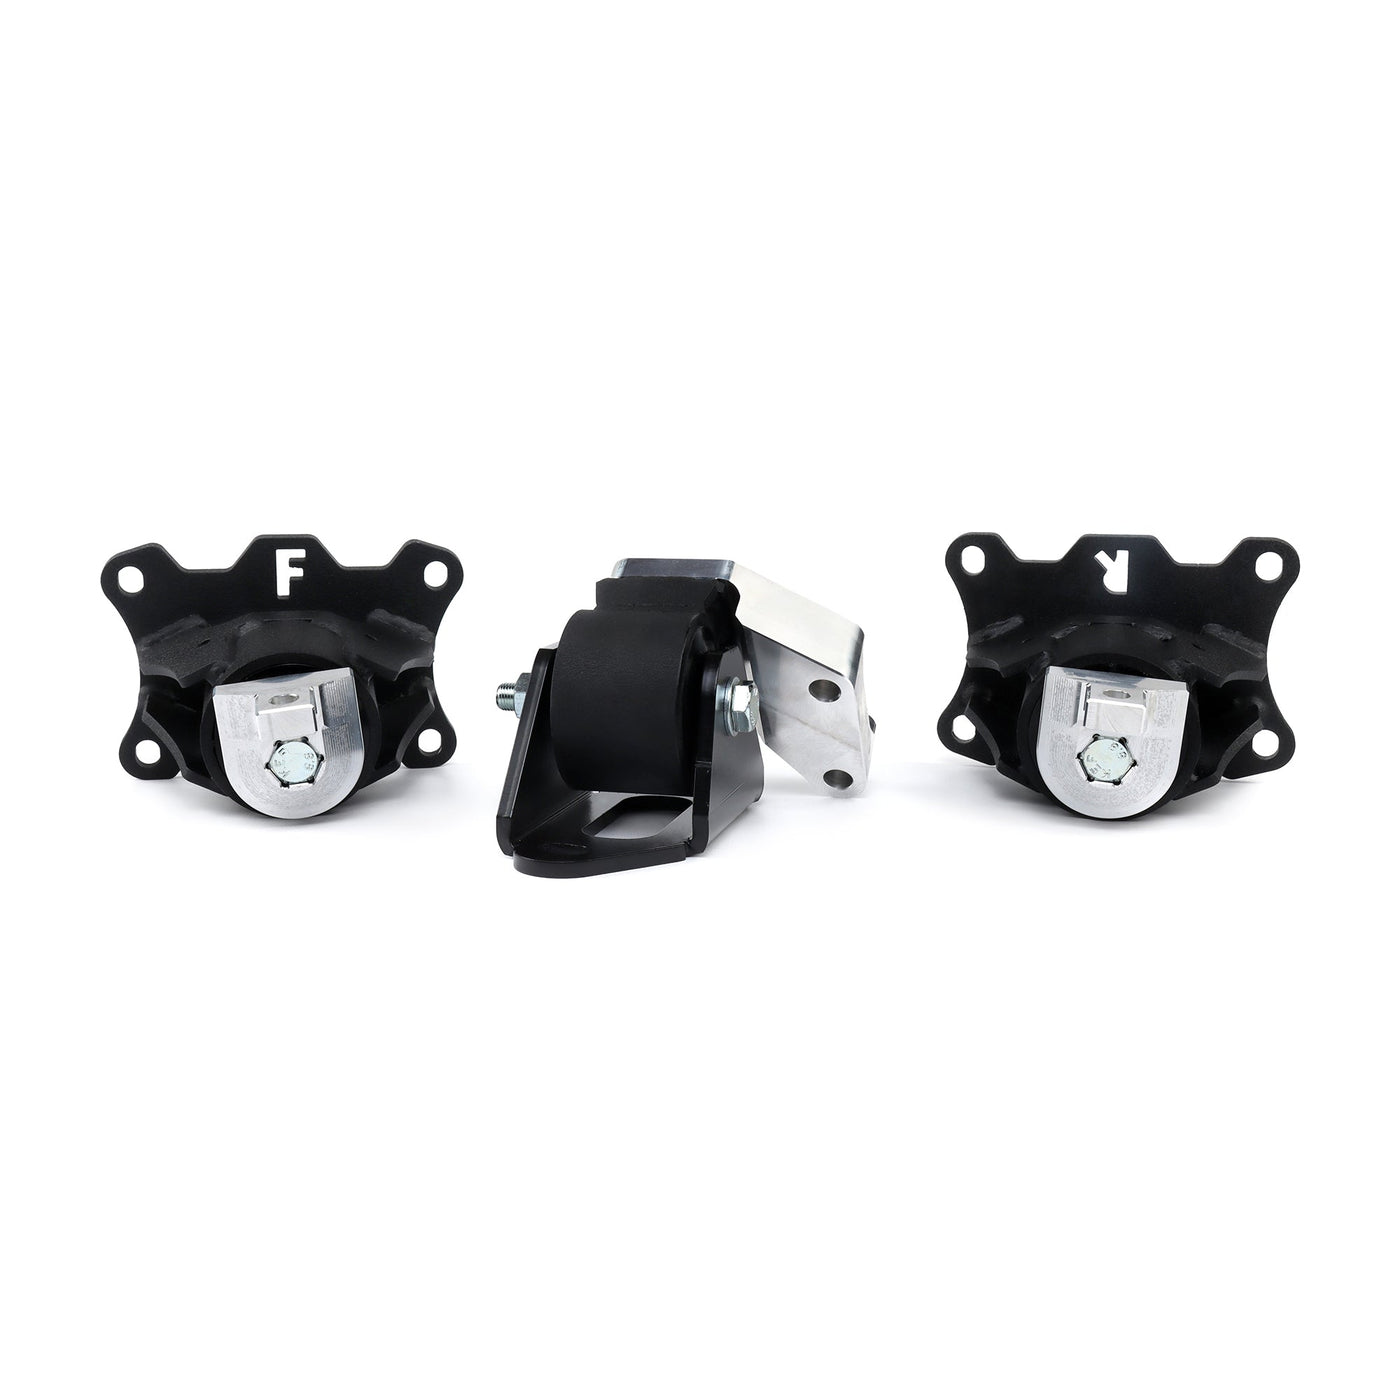 Innovative Mounts 03-07 Accord 04-08 TL J-Series V6 Replacement Mount Kit